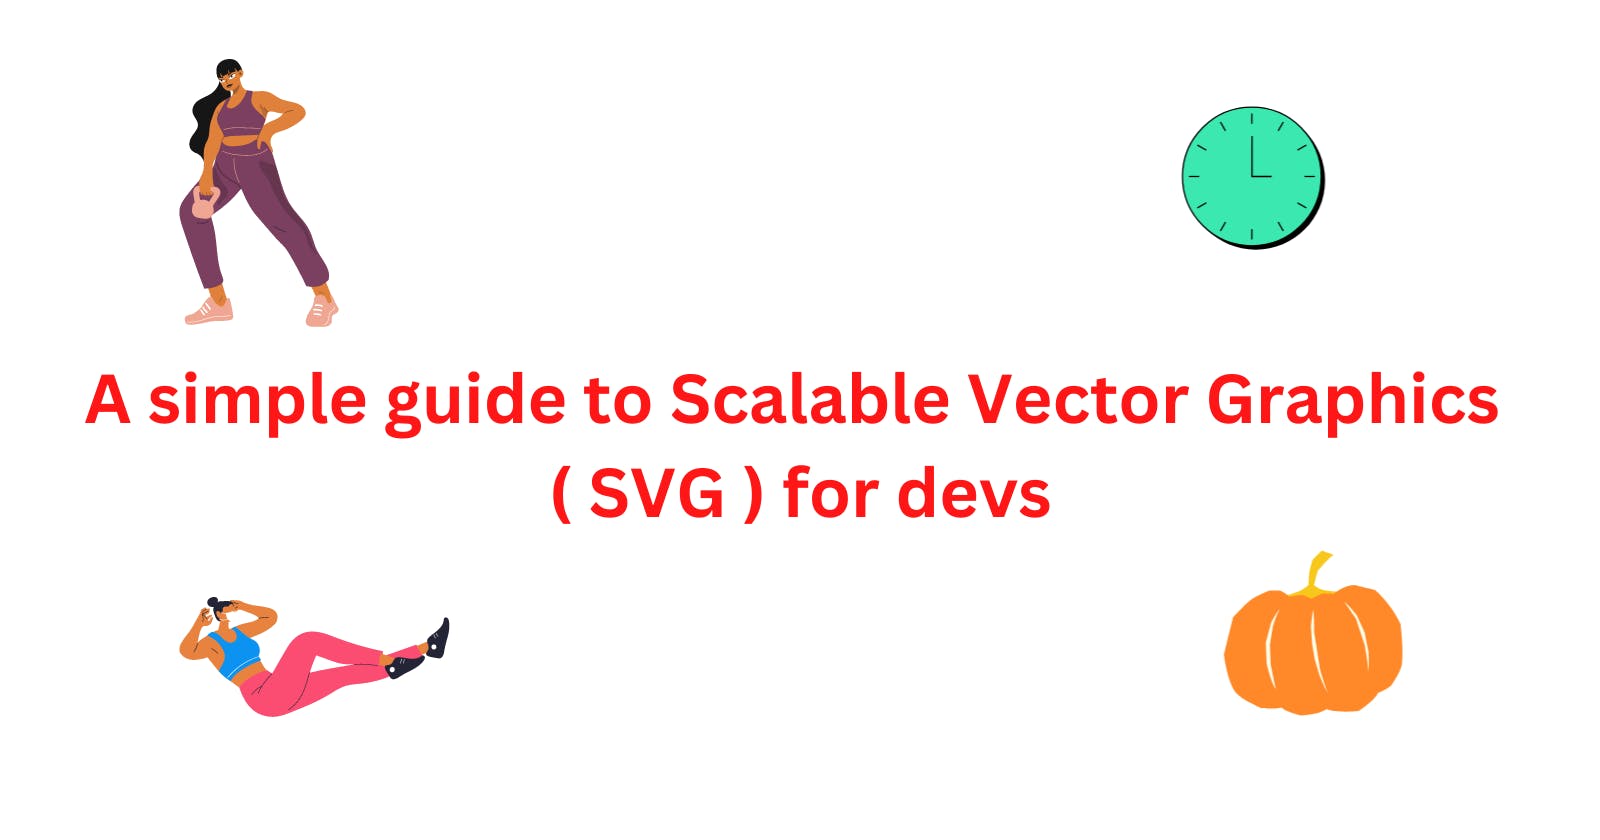 A simple guide to Scalable Vector Graphics ( SVG ) for devs